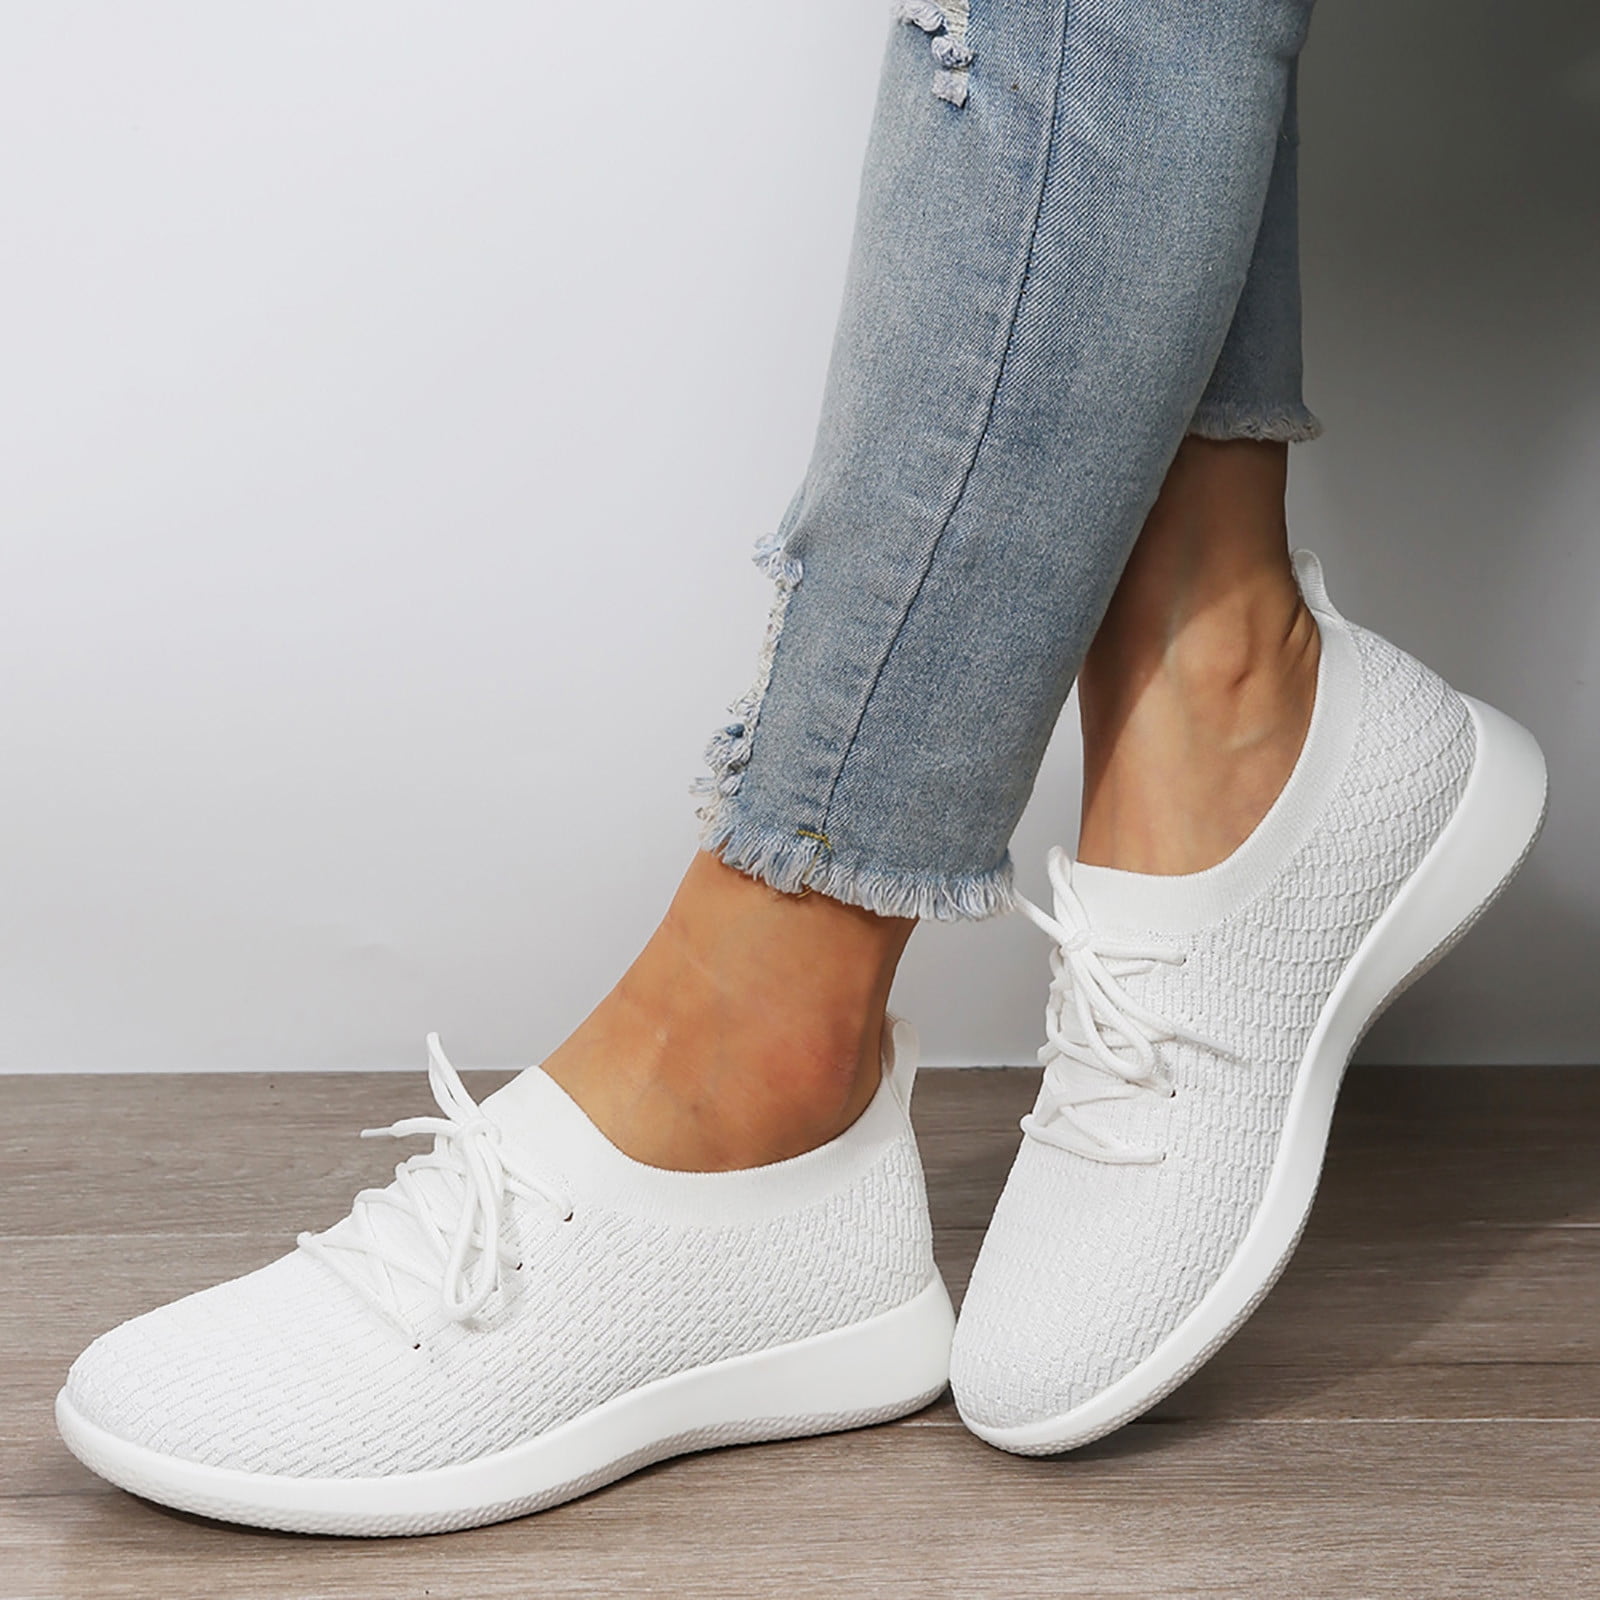 Woman Shoes New Fashion Woman Casual High Platform Leather Women Casual  White Shoes Breathable Sneaker… | Womens sneakers, White casual shoes, Womens  fashion casual